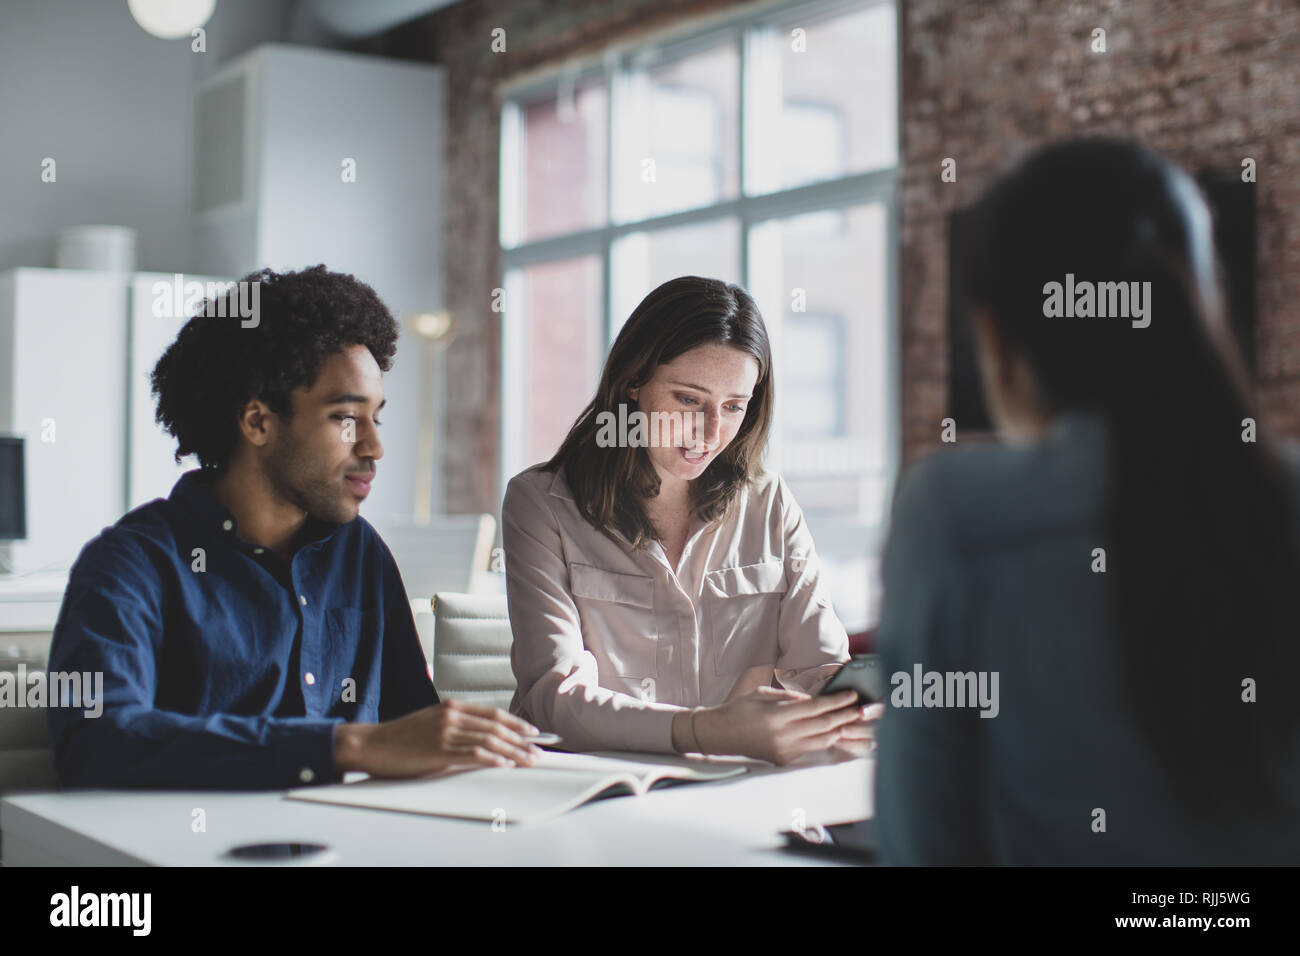 Smartphone app developers in a business meeting Stock Photo